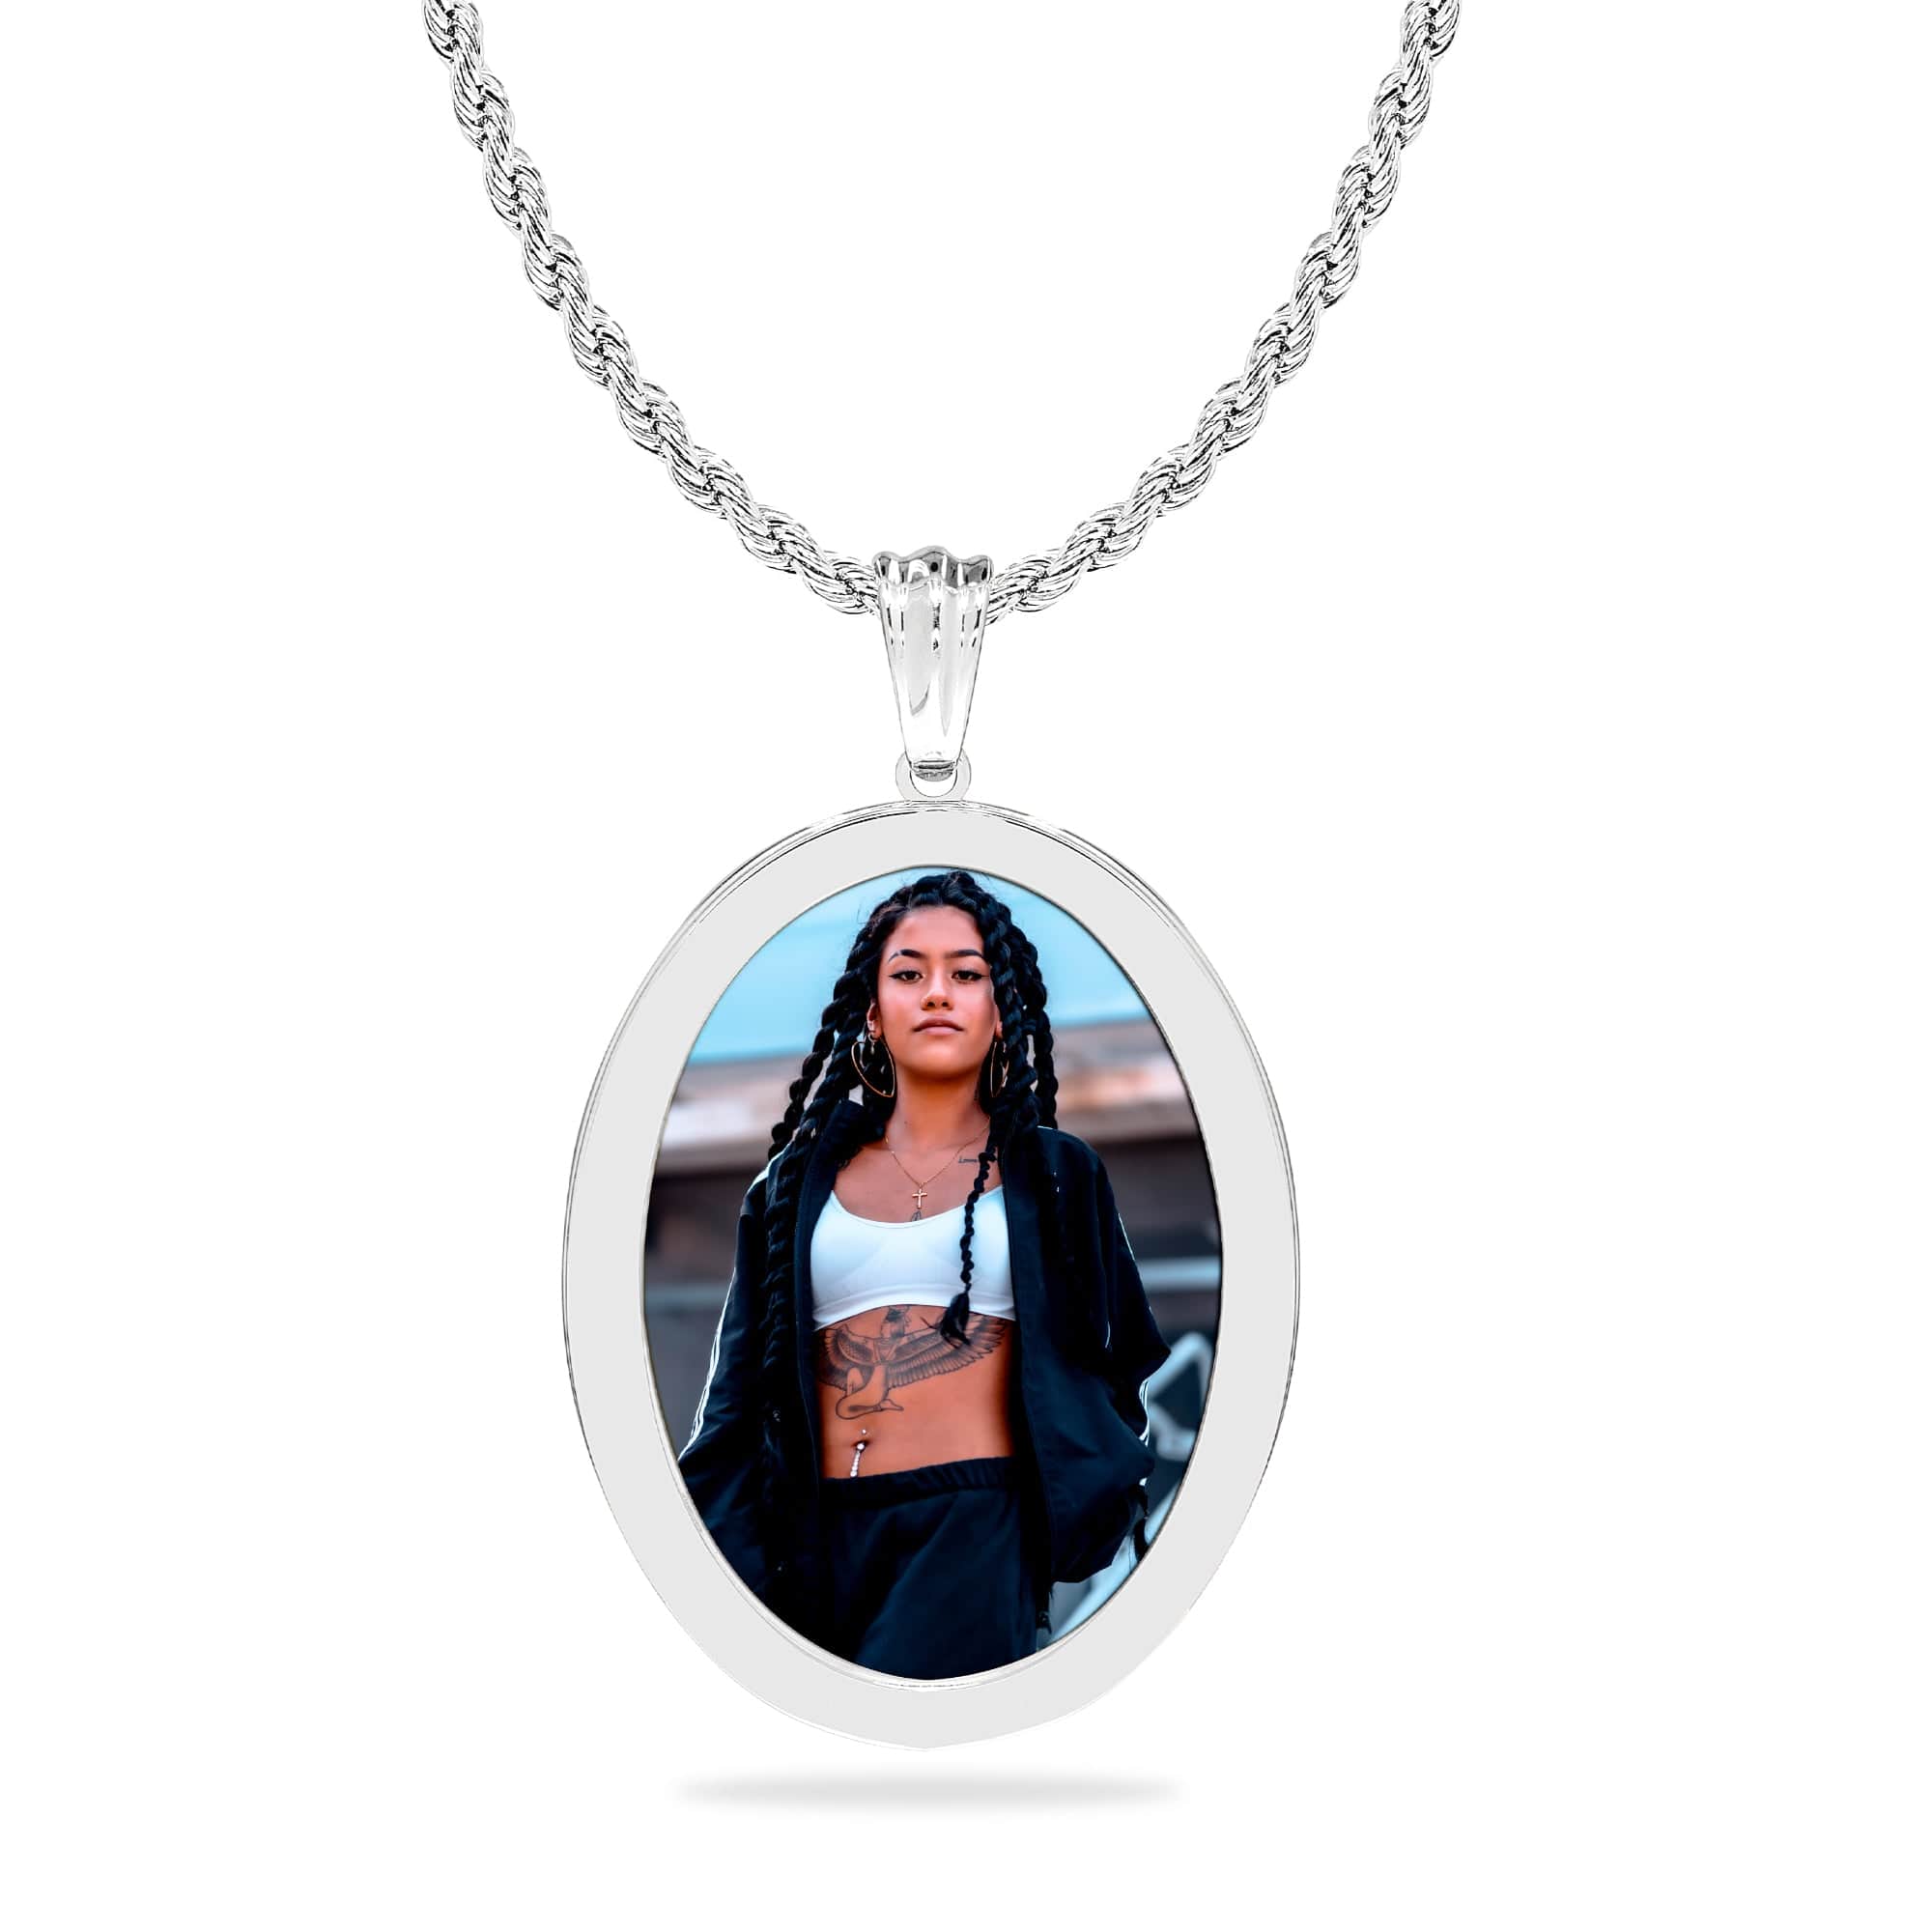 Stainless Steel / Rope Chain High Polished Oval Photo Pendant